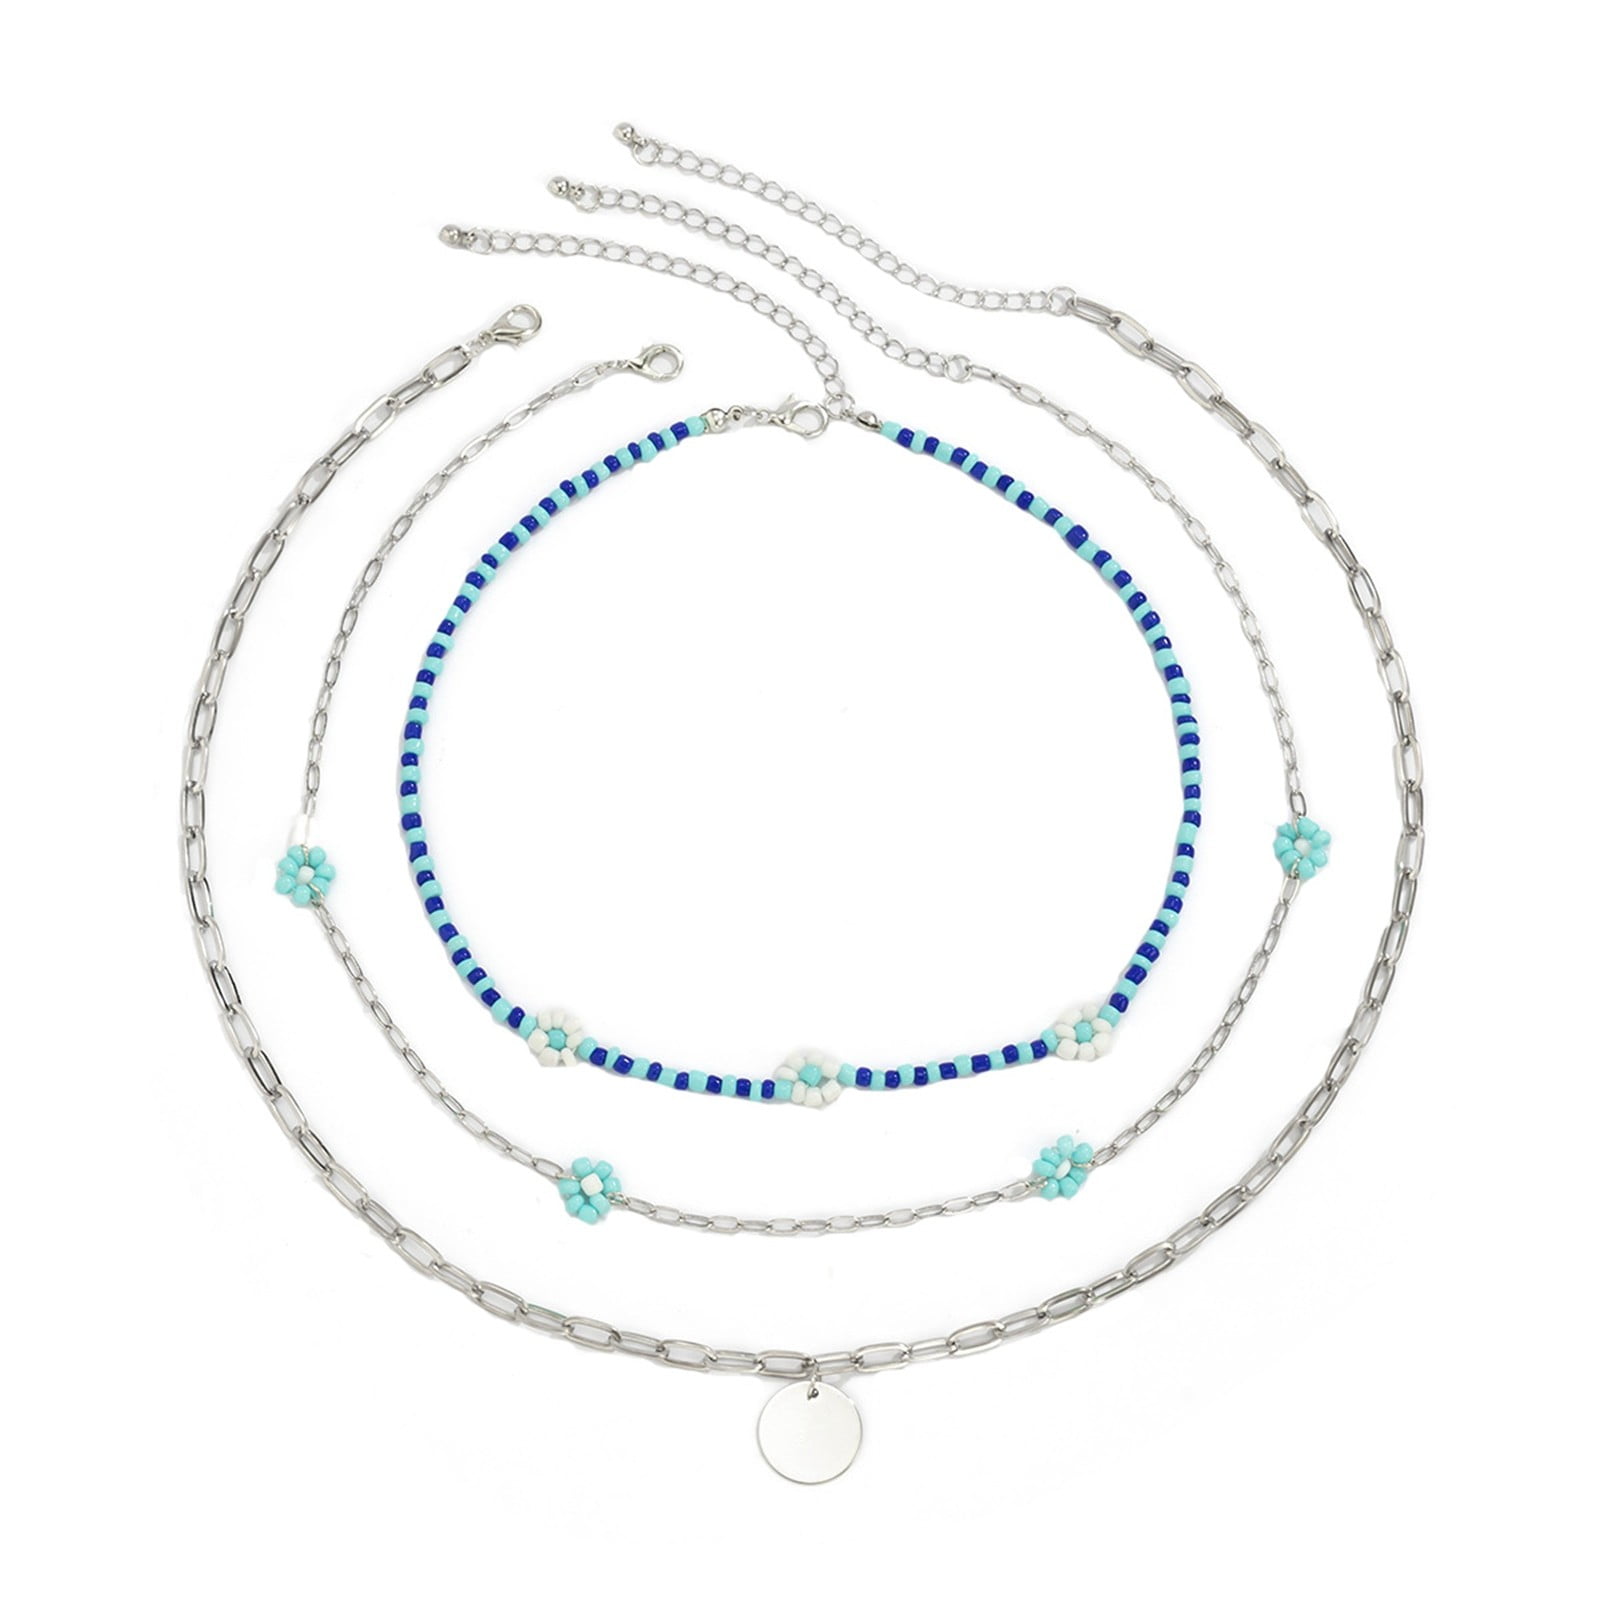 Buy Beaded Necklace, Native Beaded Necklace,Seed Beads Necklace, Rope  Necklace For Women,Handmade Necklace Multicolor (Blue,Green) at Amazon.in